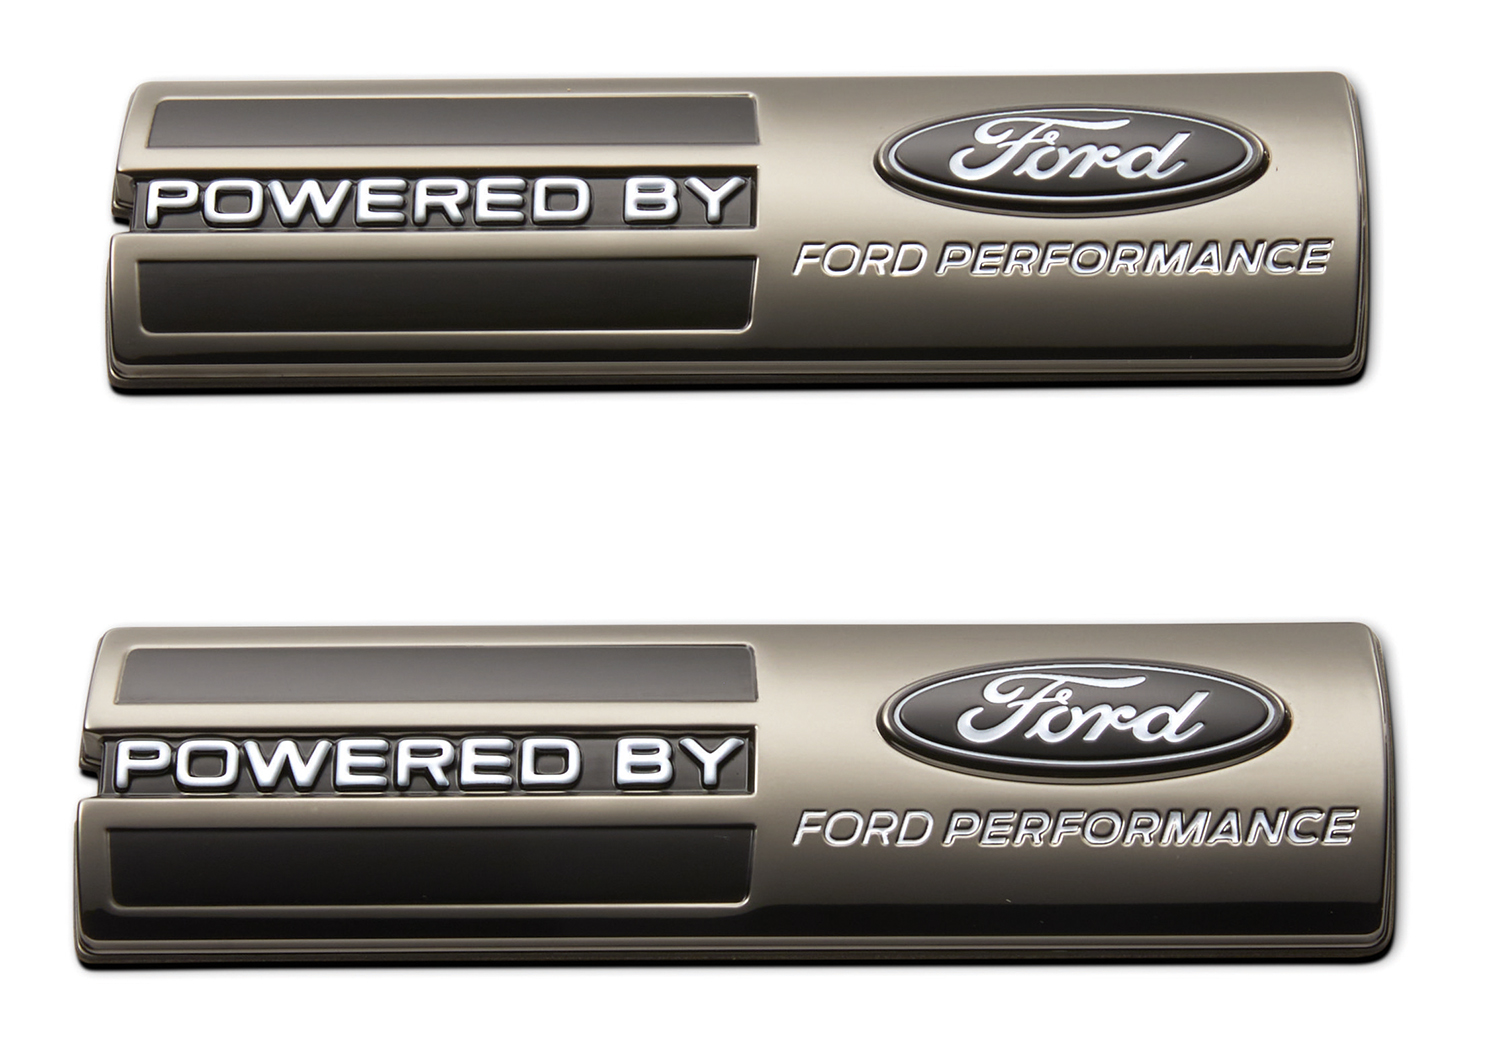 POWERED BY FORD PERFORMANCE BADGE - BLACK, Part Details for M-16098-PBFPB